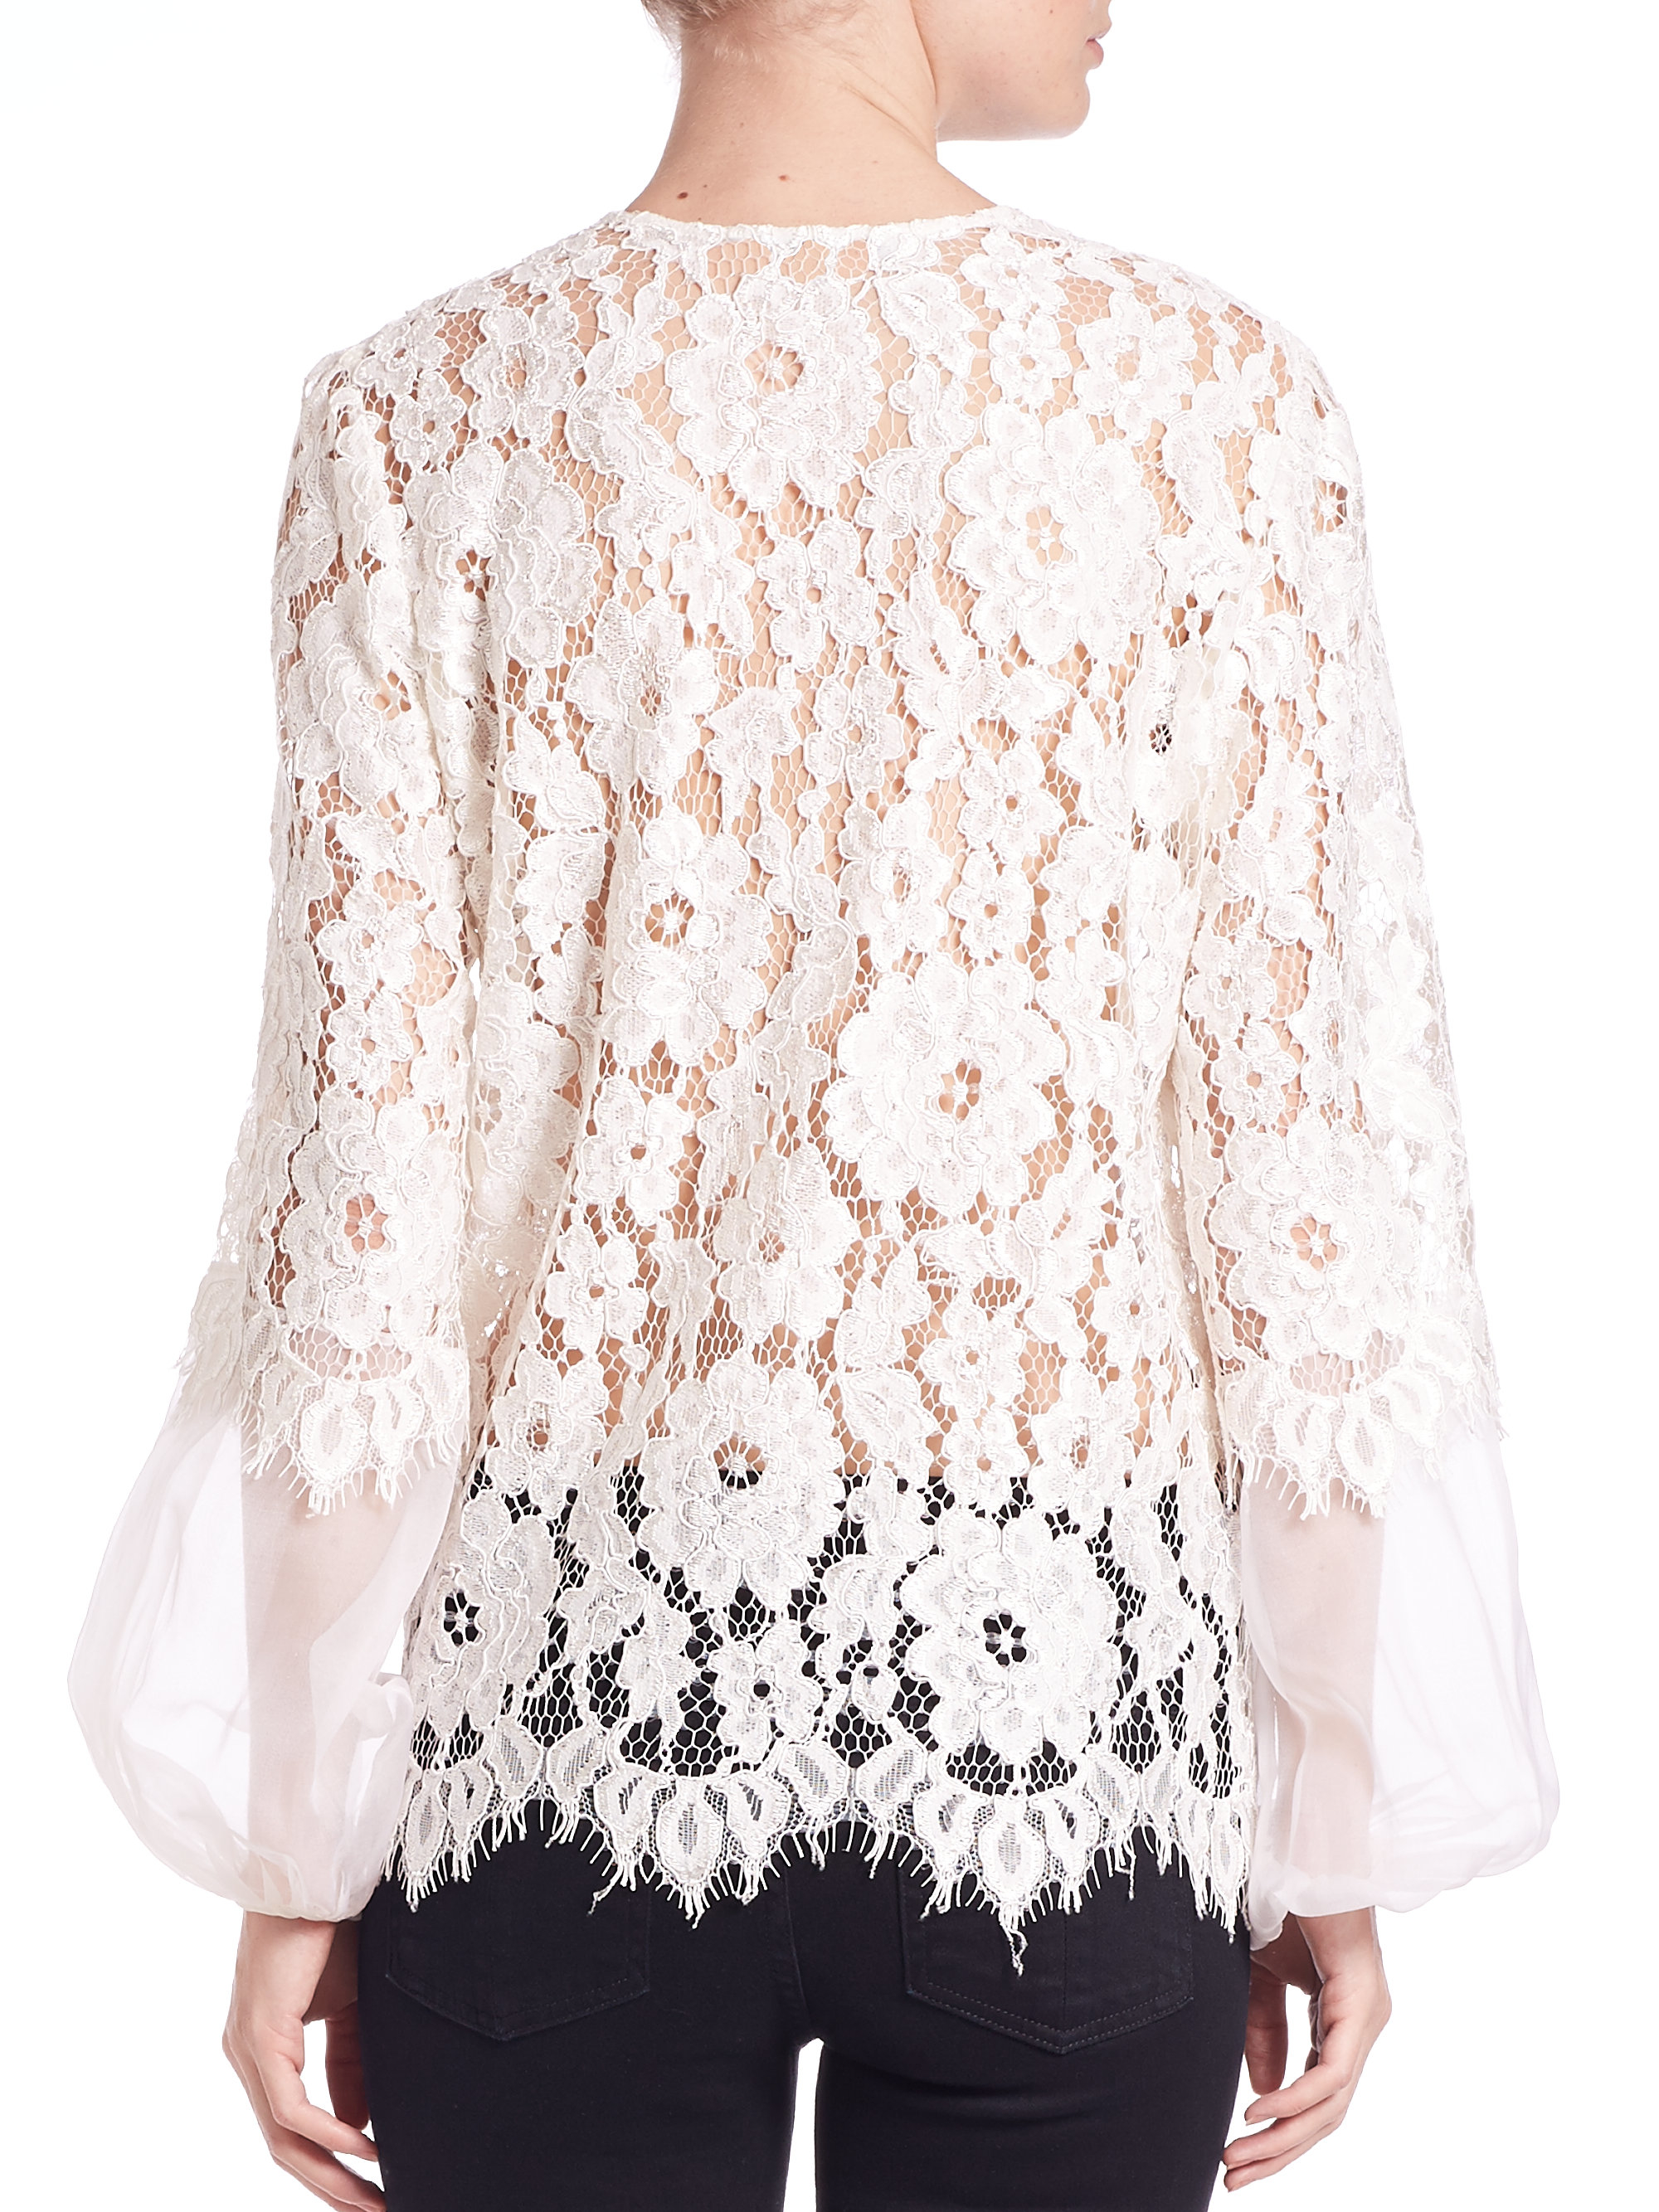 Alexis Sue Lace Blouse in Natural - Lyst